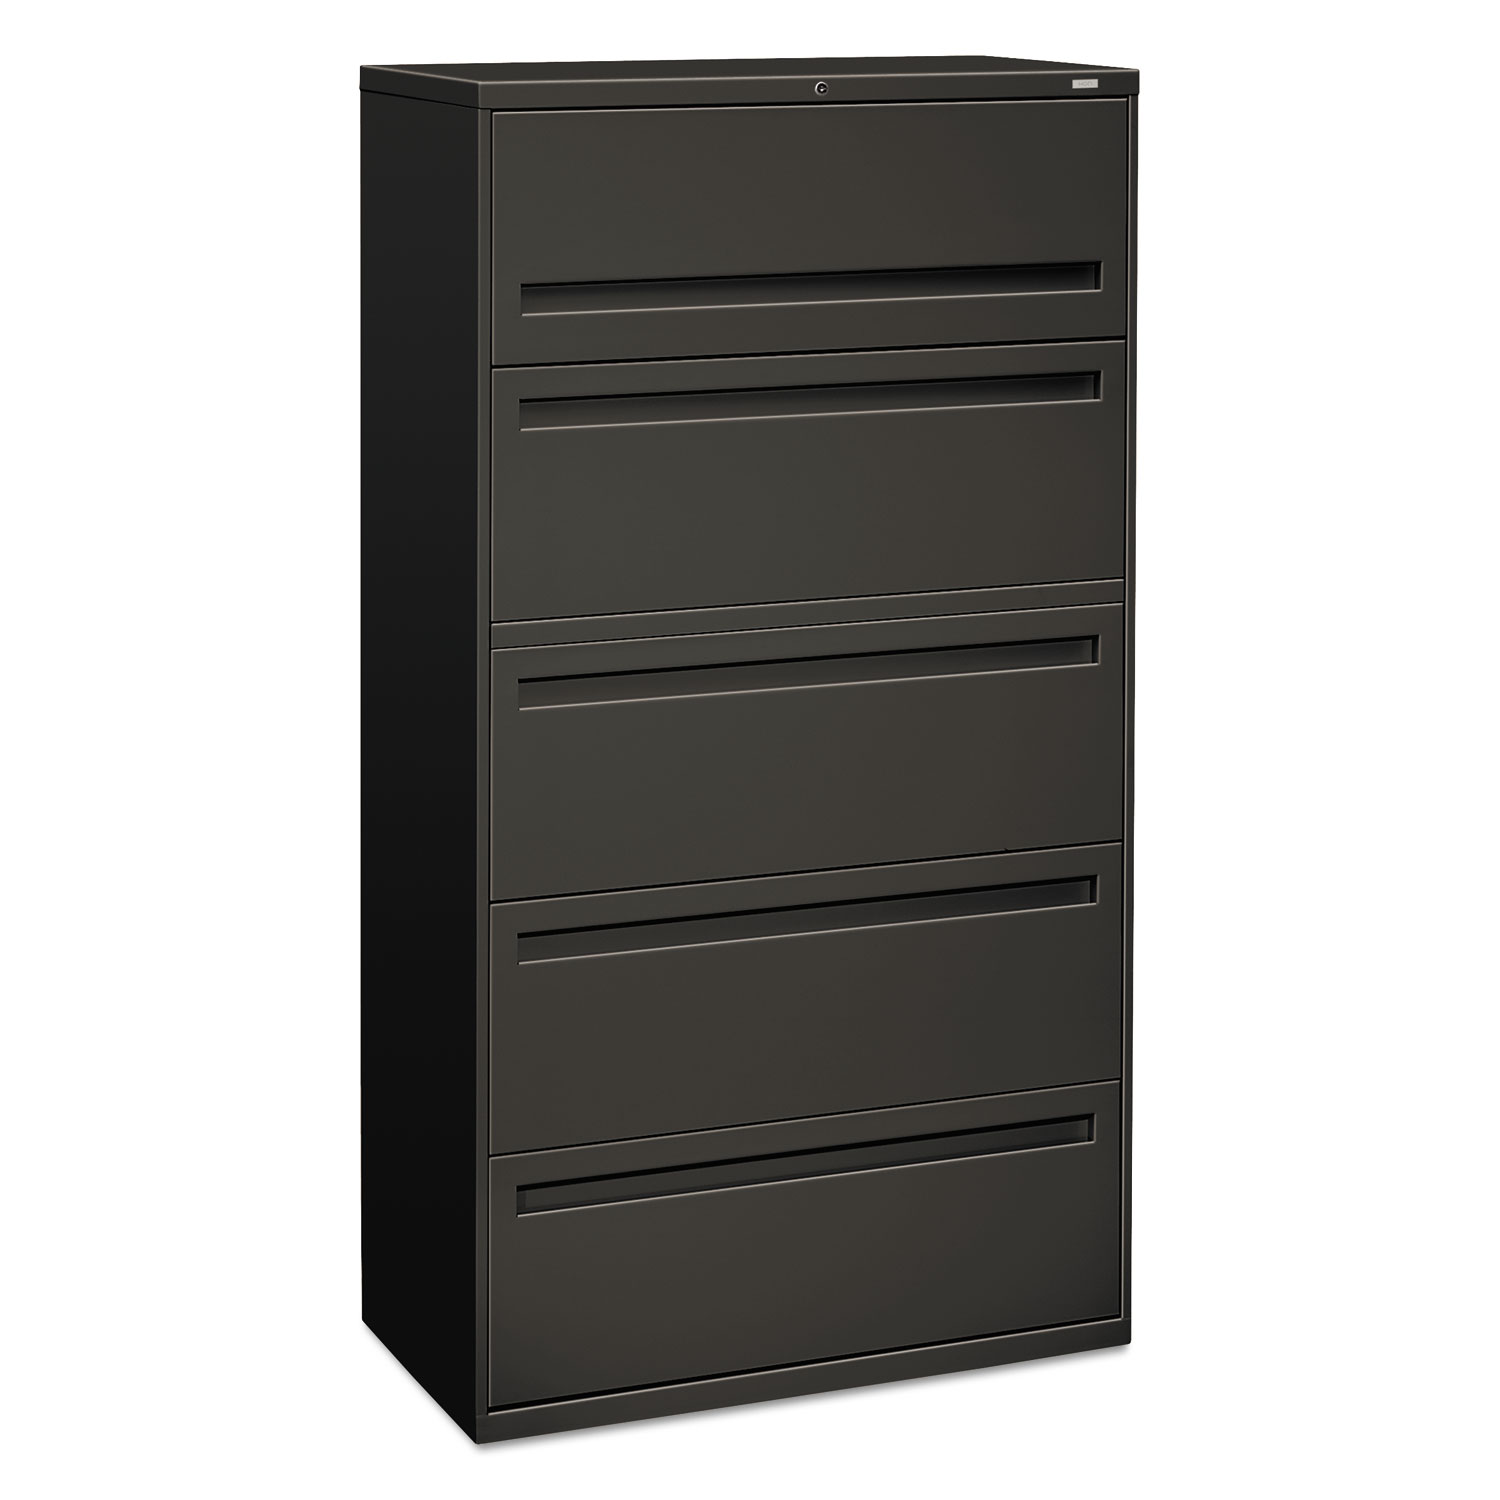  HON H785.L.S 700 Series Five-Drawer Lateral File with Roll-Out Shelf, 36w x 18d x 64.25h, Charcoal (HON785LS) 